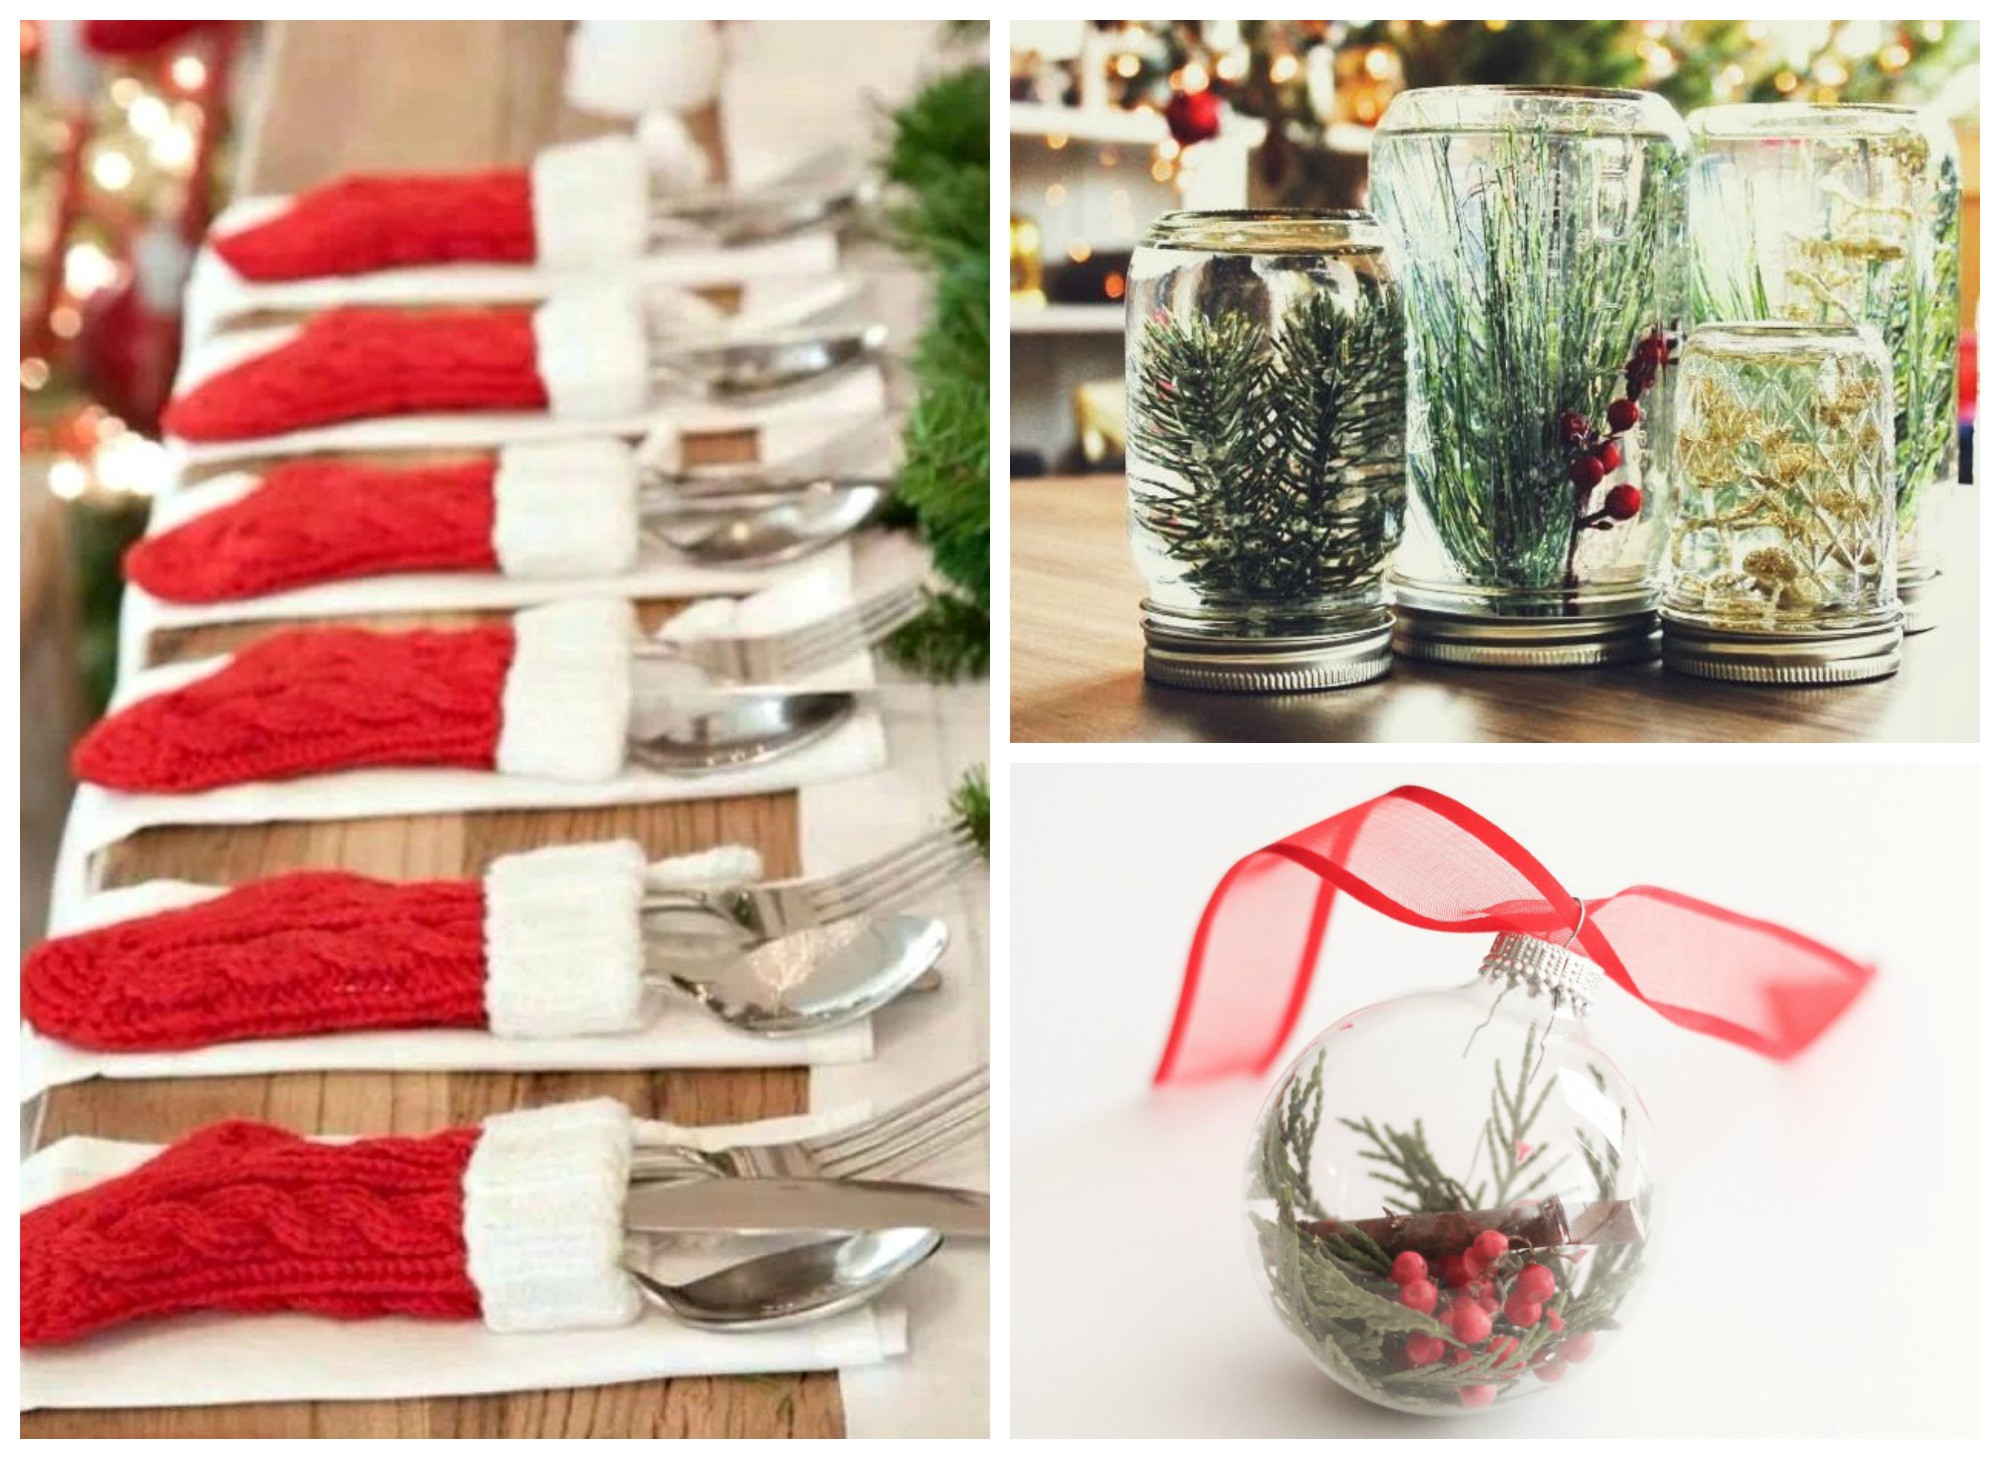 DIY Christmas Decoration Ideas
 10 Dollar Store DIY Christmas Decorations that are Beyond Easy